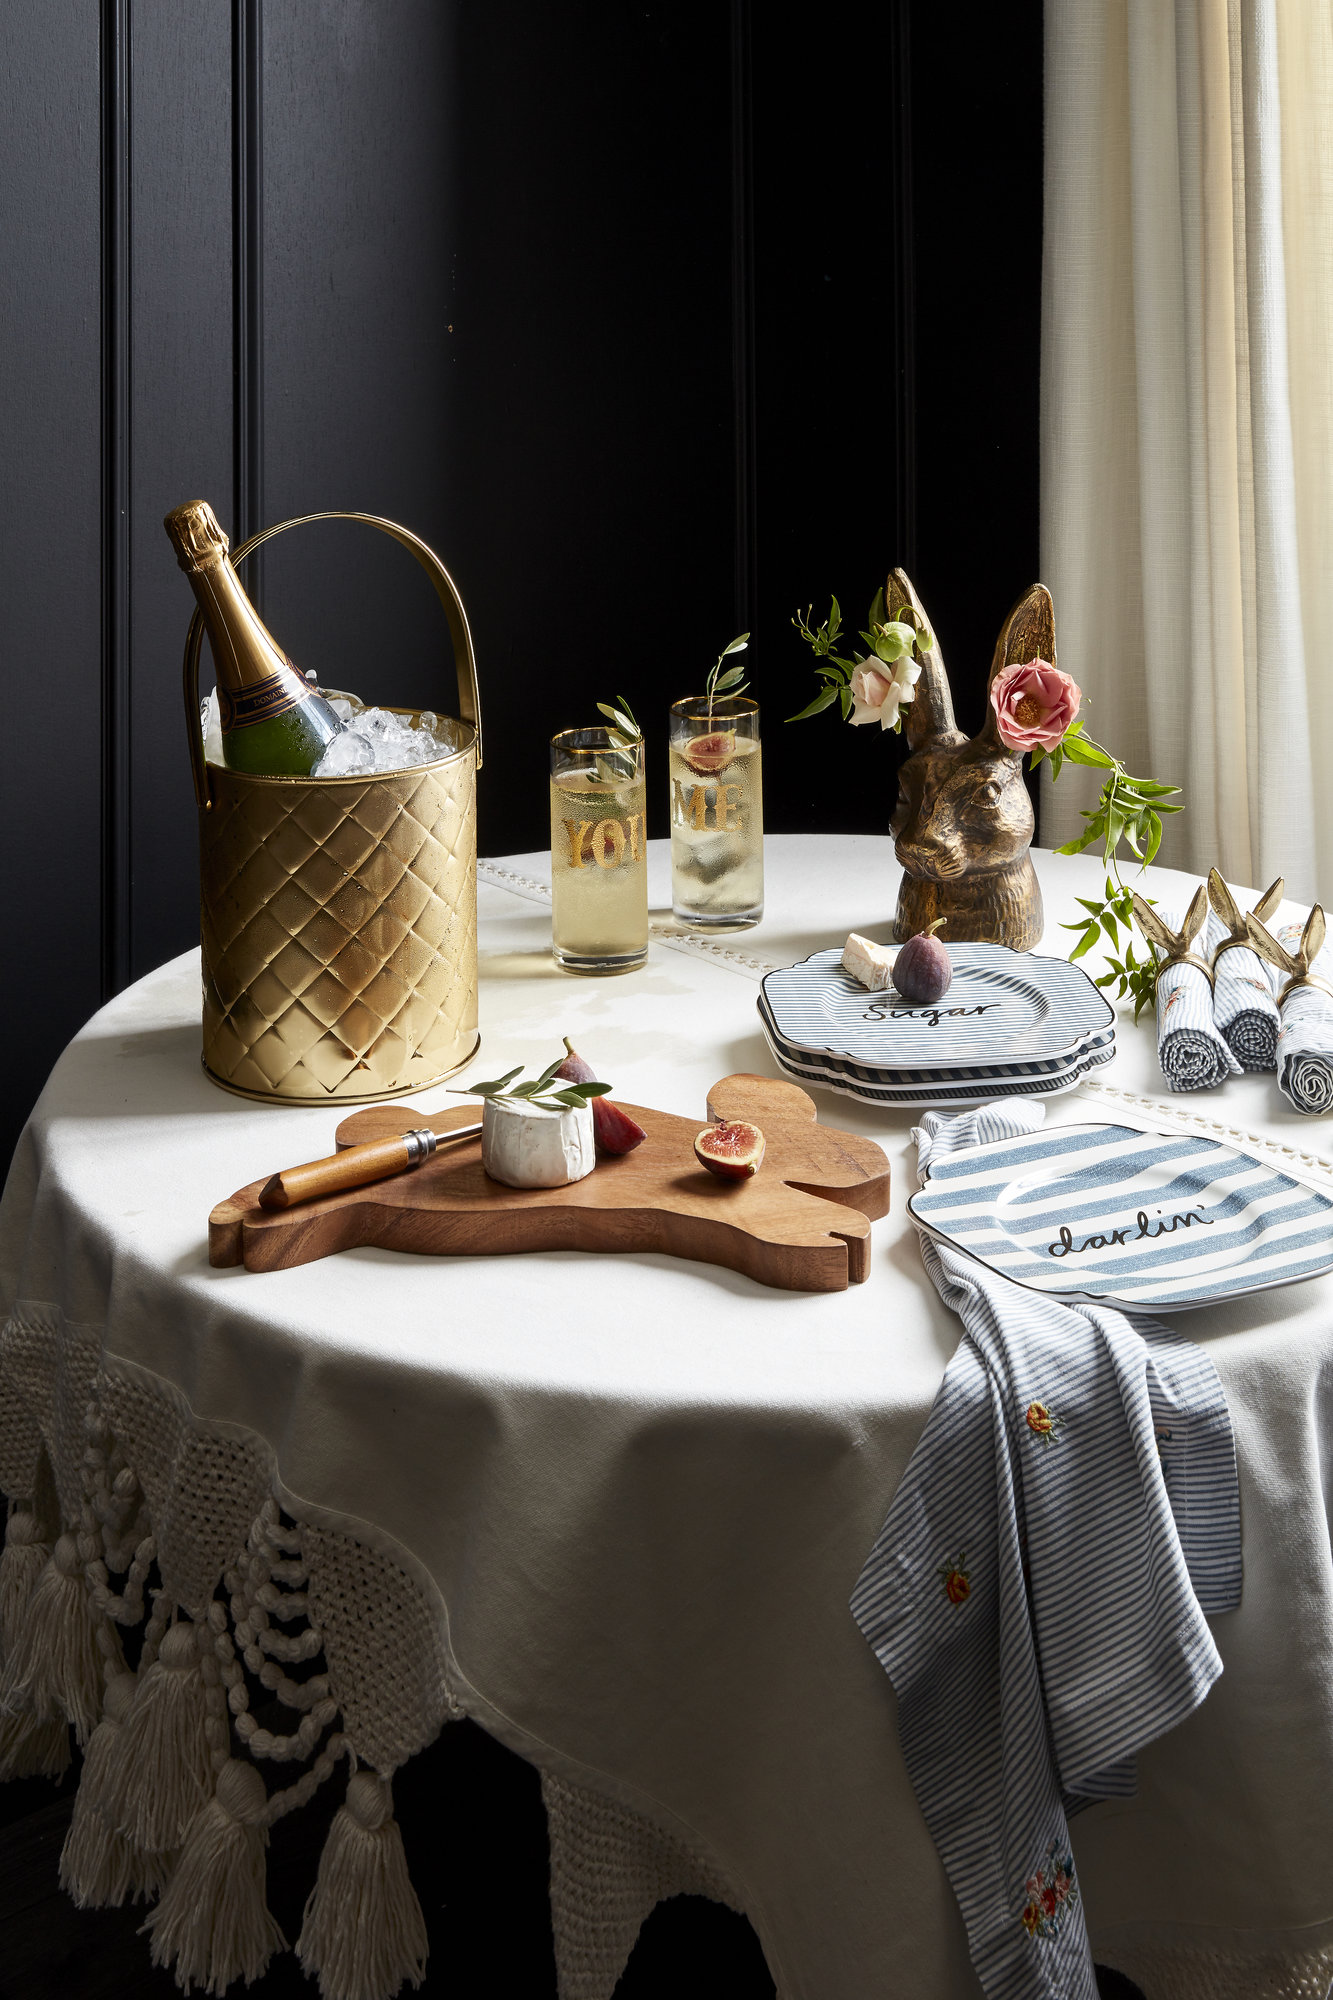 Pottery Barn's Emily & Meritt Spring 2019 Collection Is Fresh and Relaxing